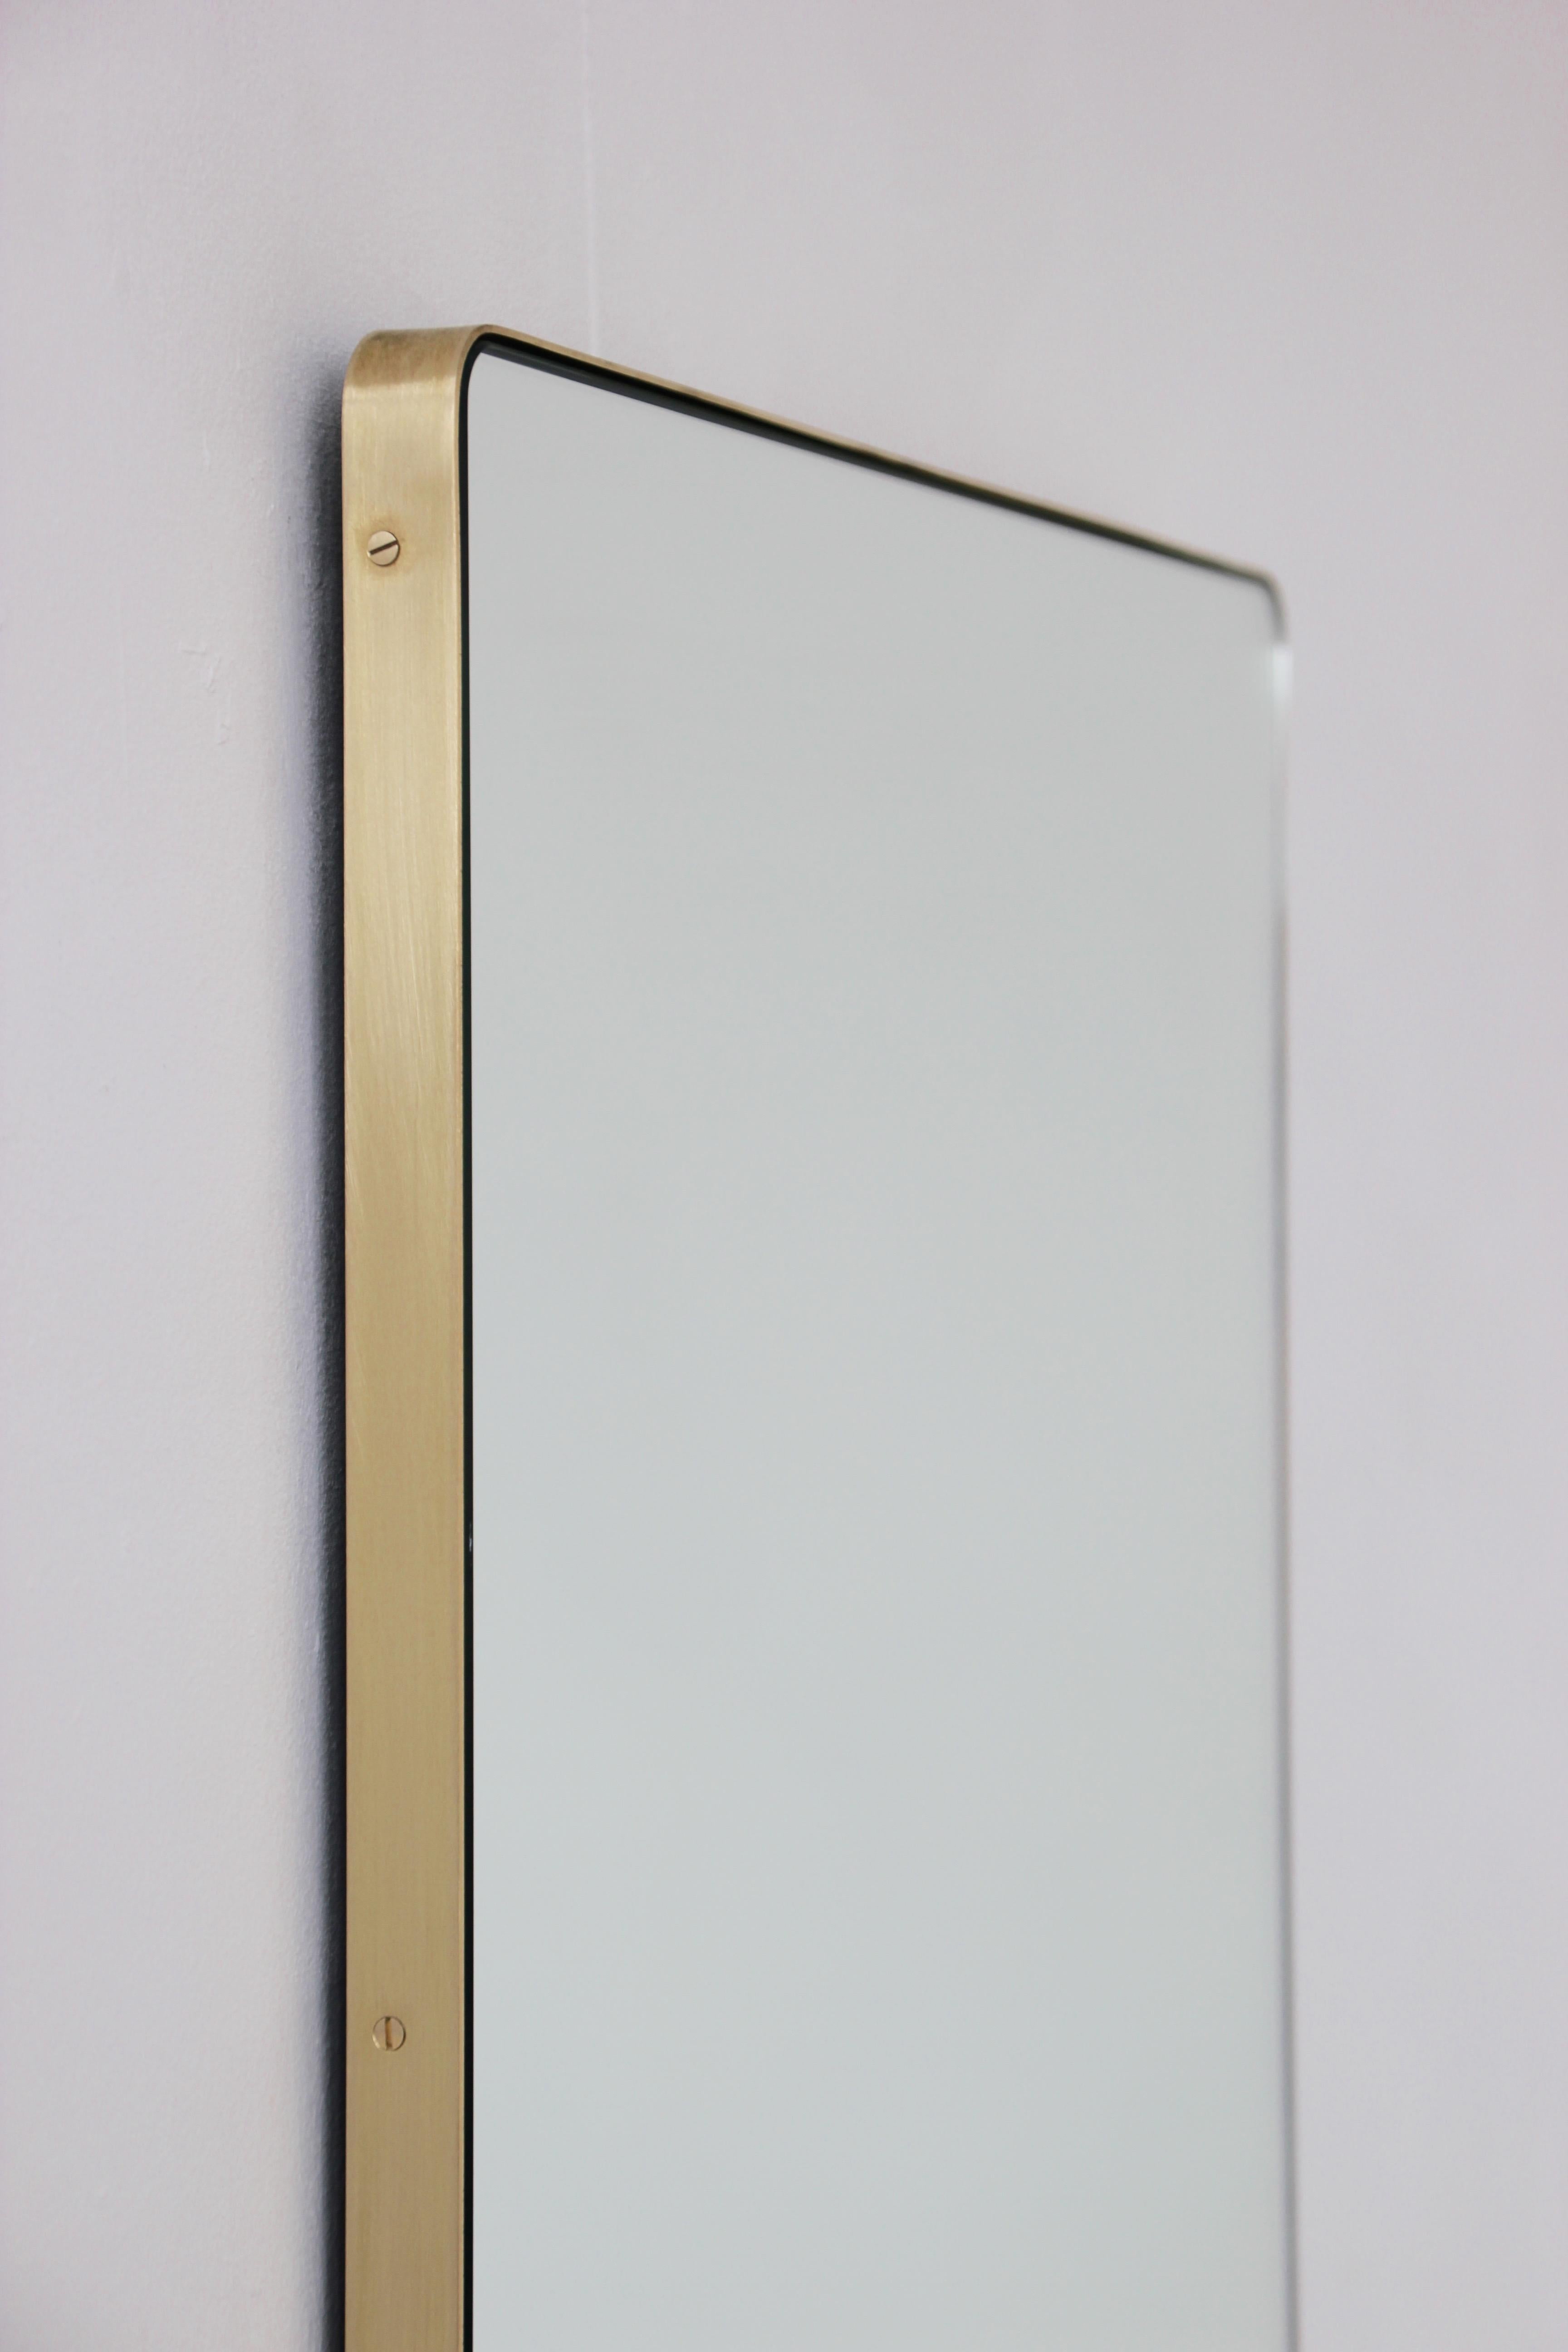 Elegant rectangular mirror with a slim brass frame. The detailing and finish, including visible brass screws, emphasise the craft and quality feel of the mirror, a true signature of our brand. Designed and handcrafted in London, UK.

Supplied fully